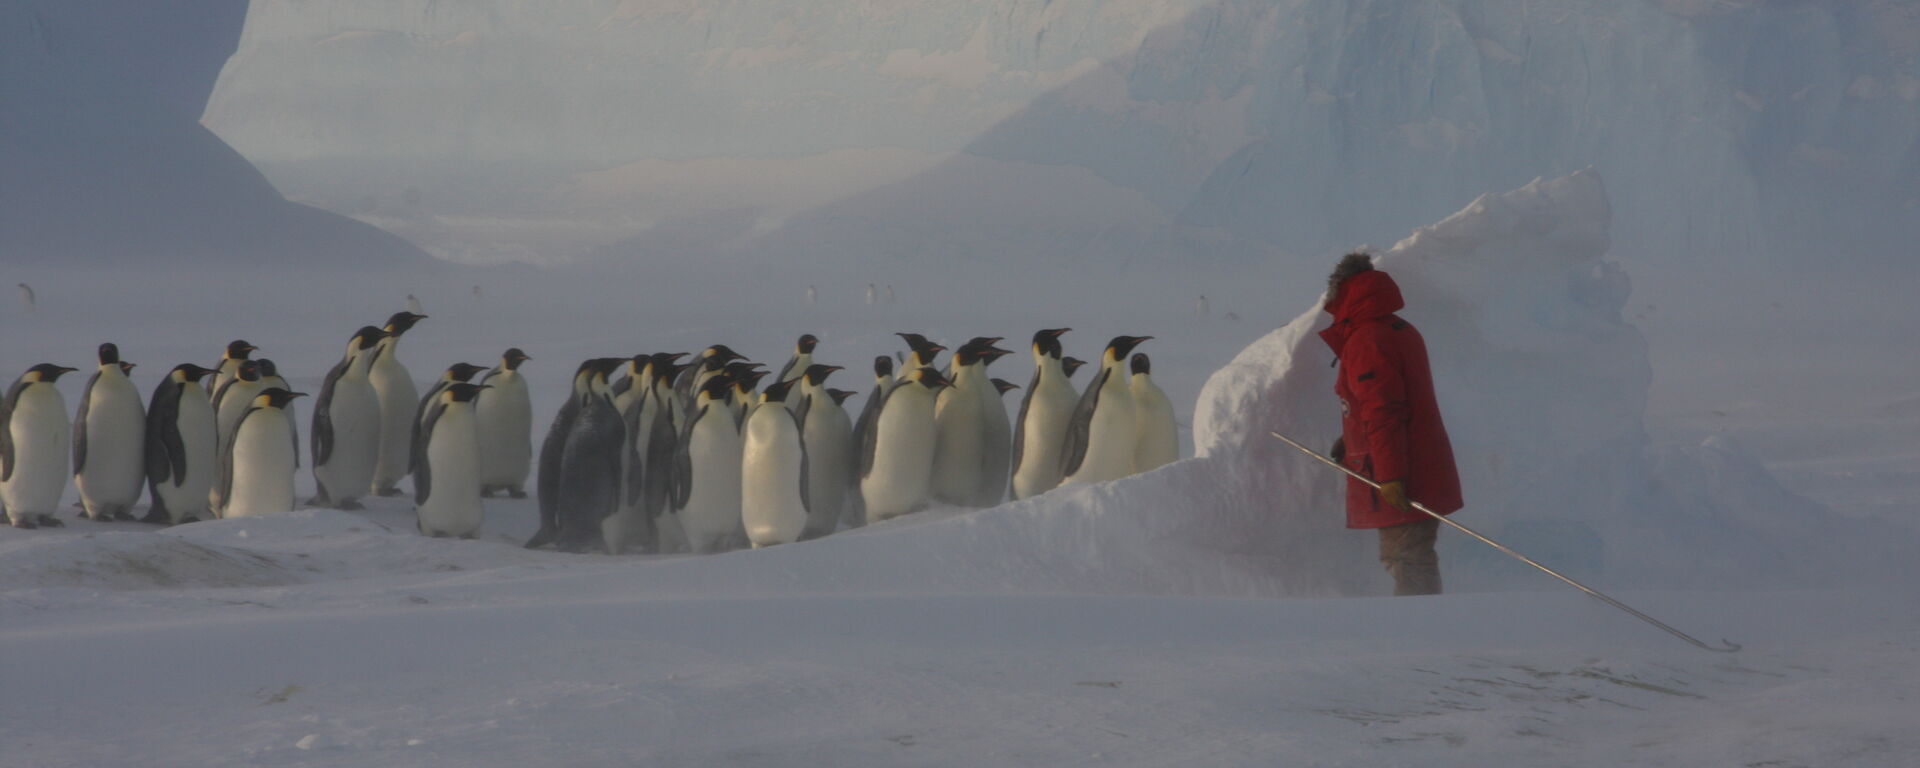 Expeditioner hiding behind some ice with penguins in background